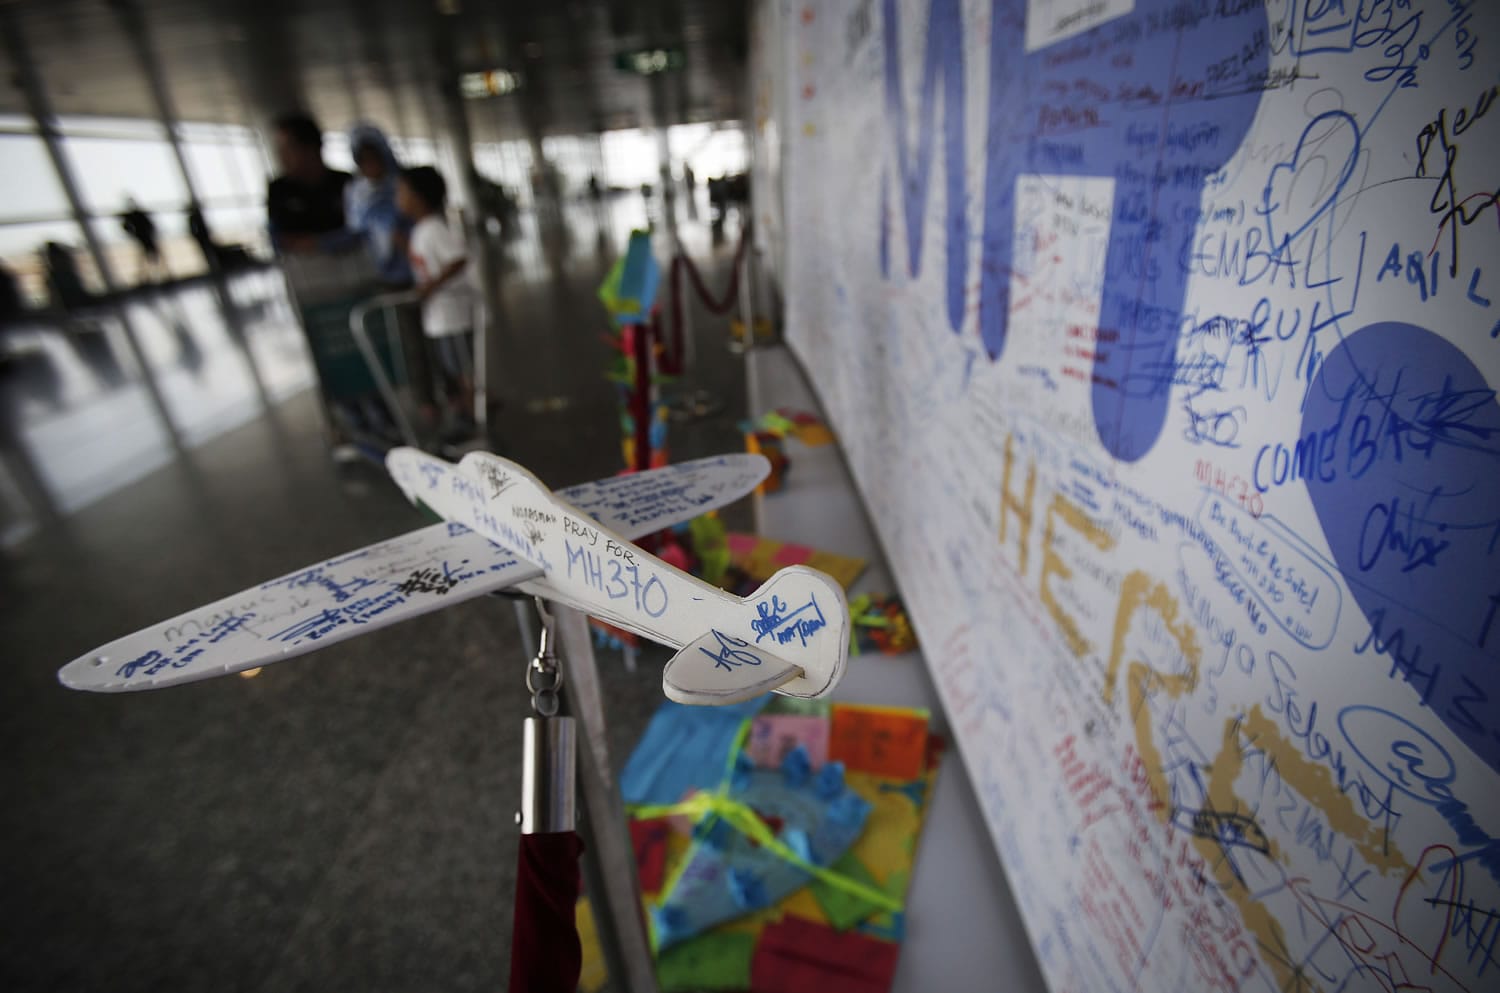 A foam plane with messages and cards with personalized messages dedicated to people involved with the missing Malaysia Airlines jetliner MH370, are placed in the viewing gallery at Kuala Lumpur International Airport, Saturday, March 15, 2014 in Sepang, Malaysia.